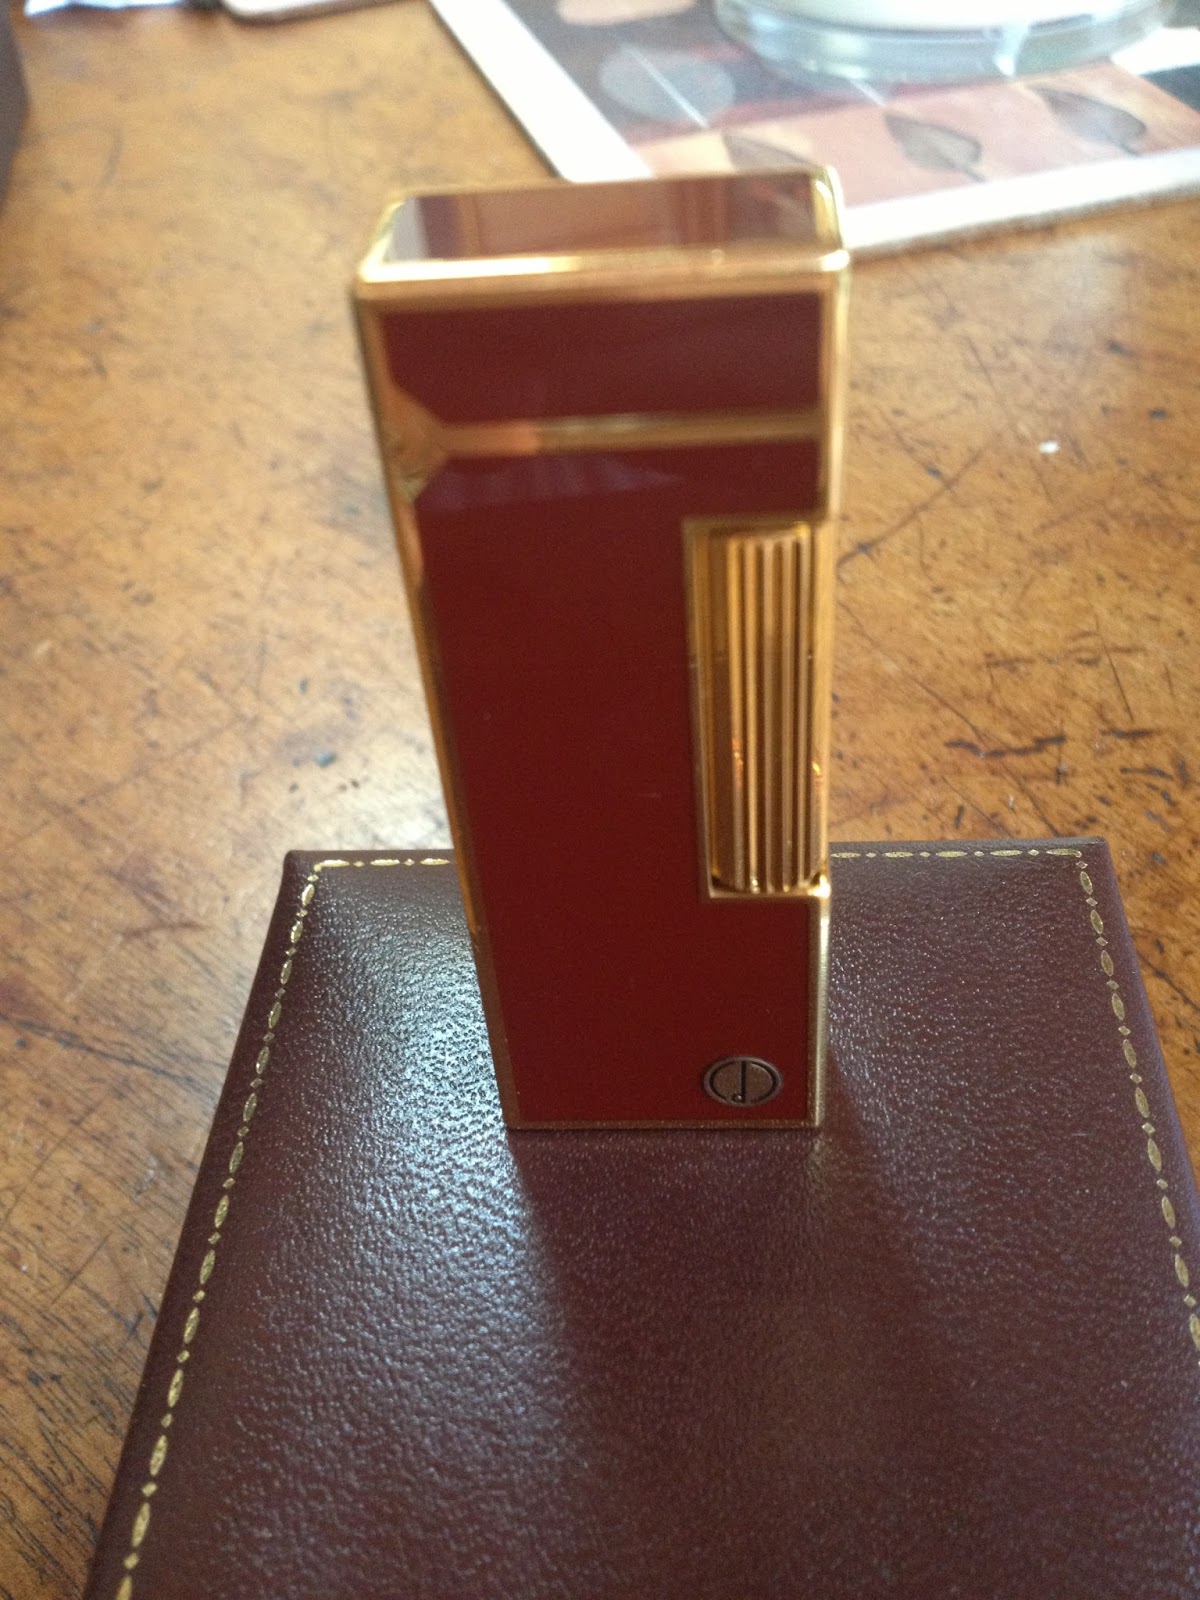 Dunhill Lighter Collection: Dunhill Lighter Photographs with Information